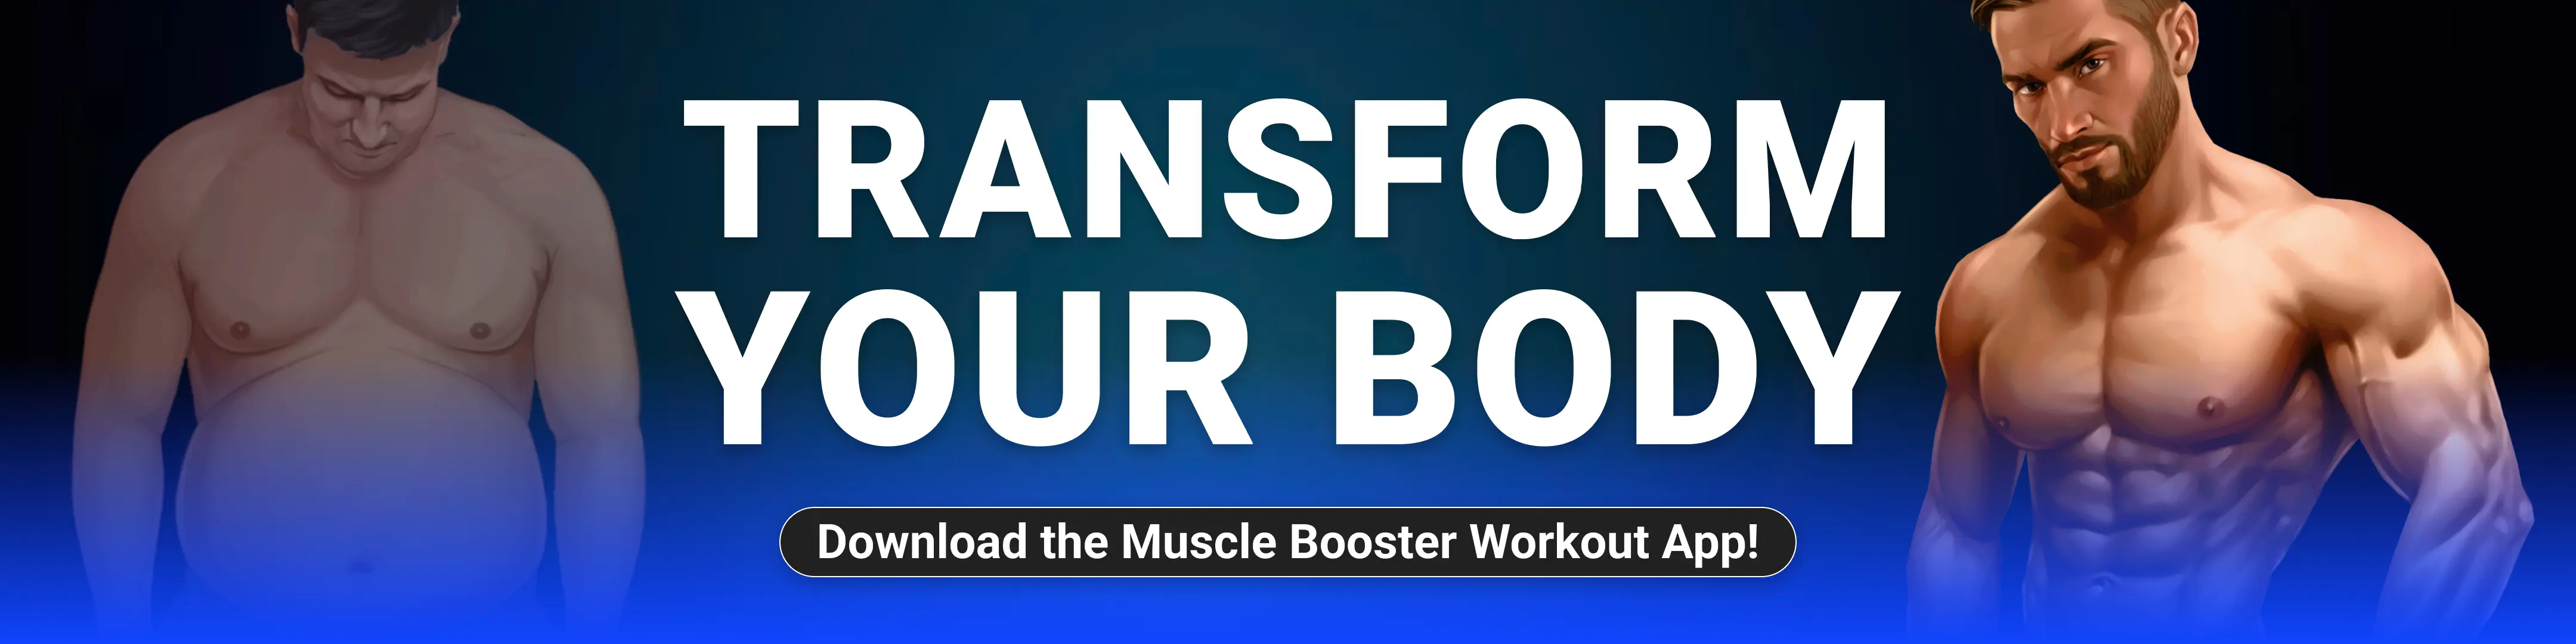 Change Your Body With The Muscle Booster Workout App